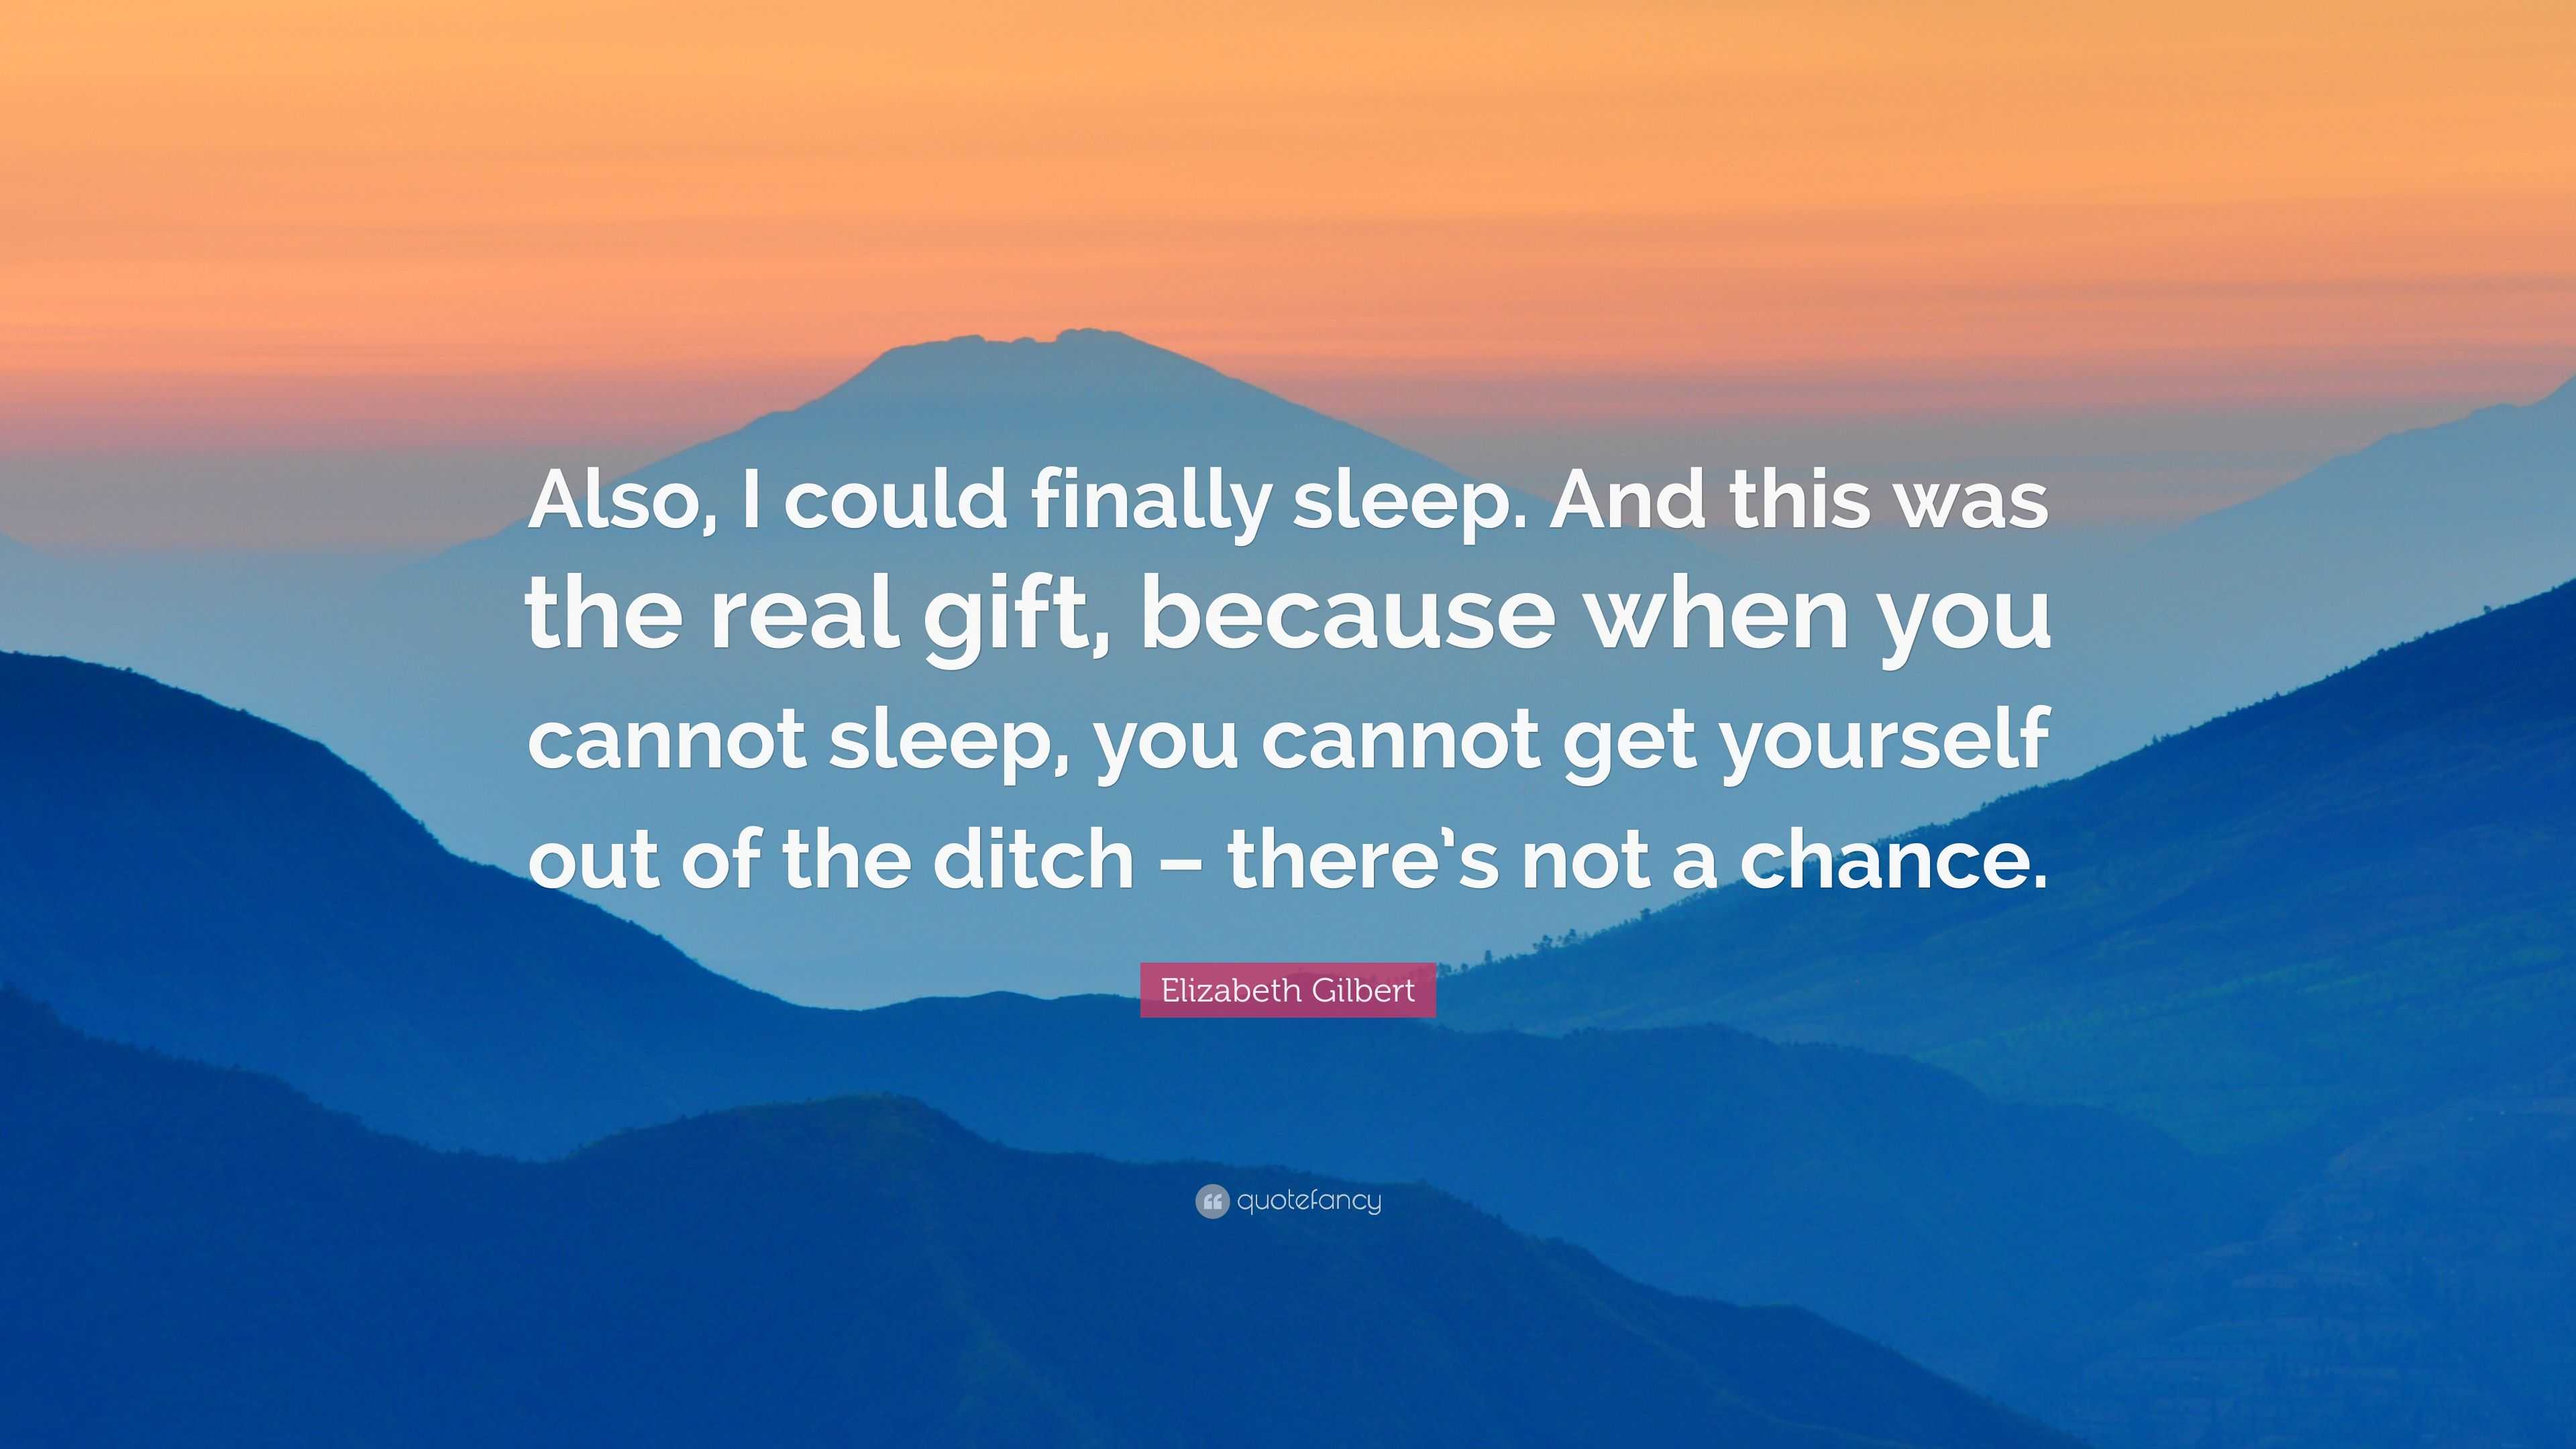 Elizabeth Gilbert Quote: “Also, I could finally sleep. And this was the ...